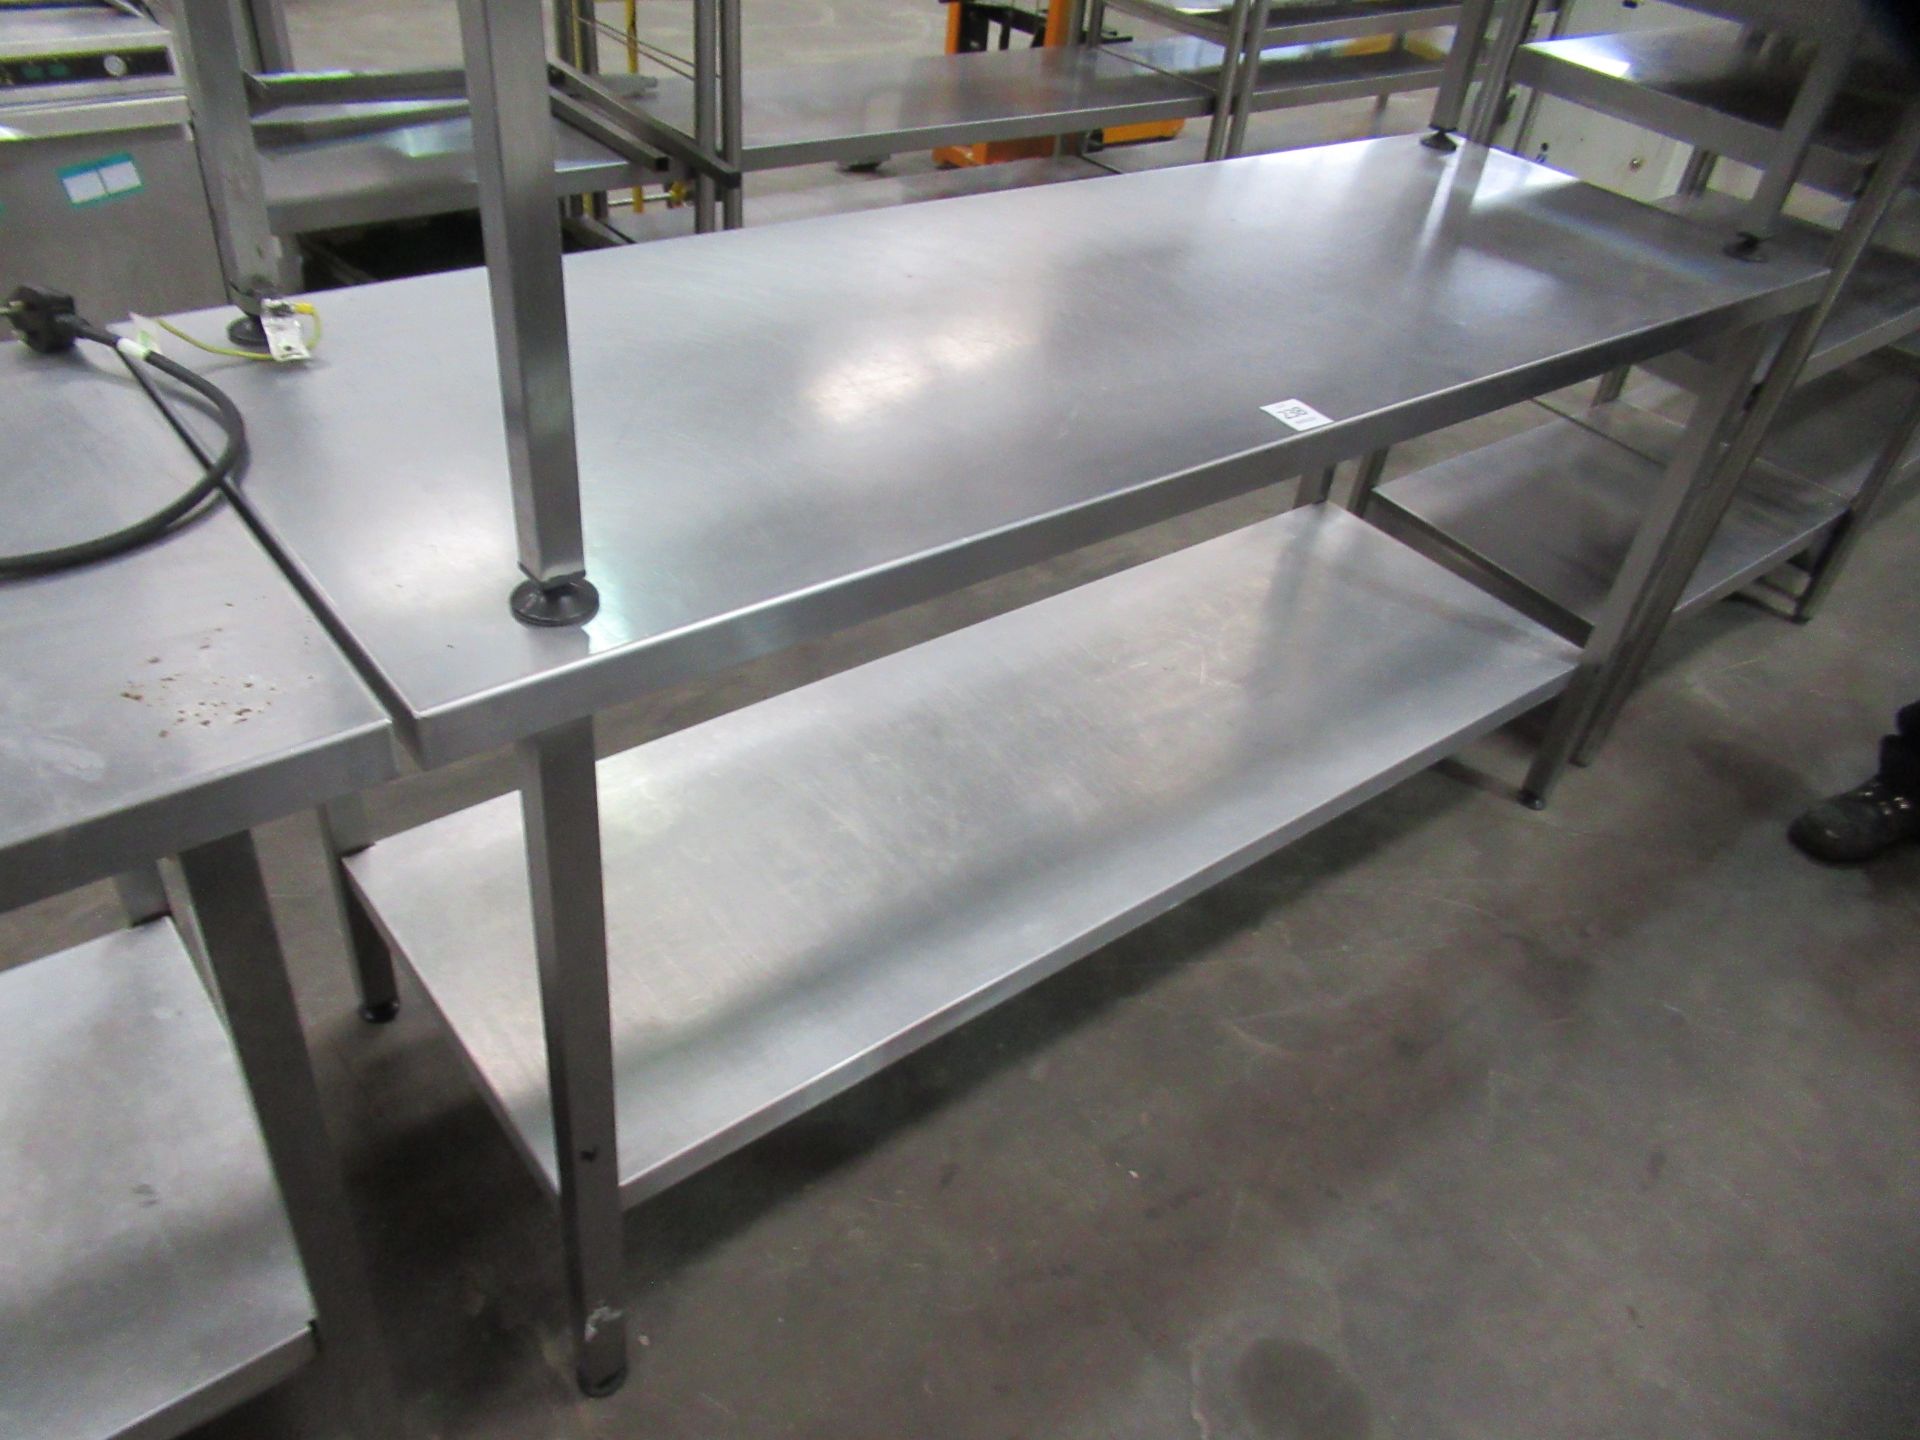 2x Stainless Steel Two Tier Prep Tables - Image 3 of 3